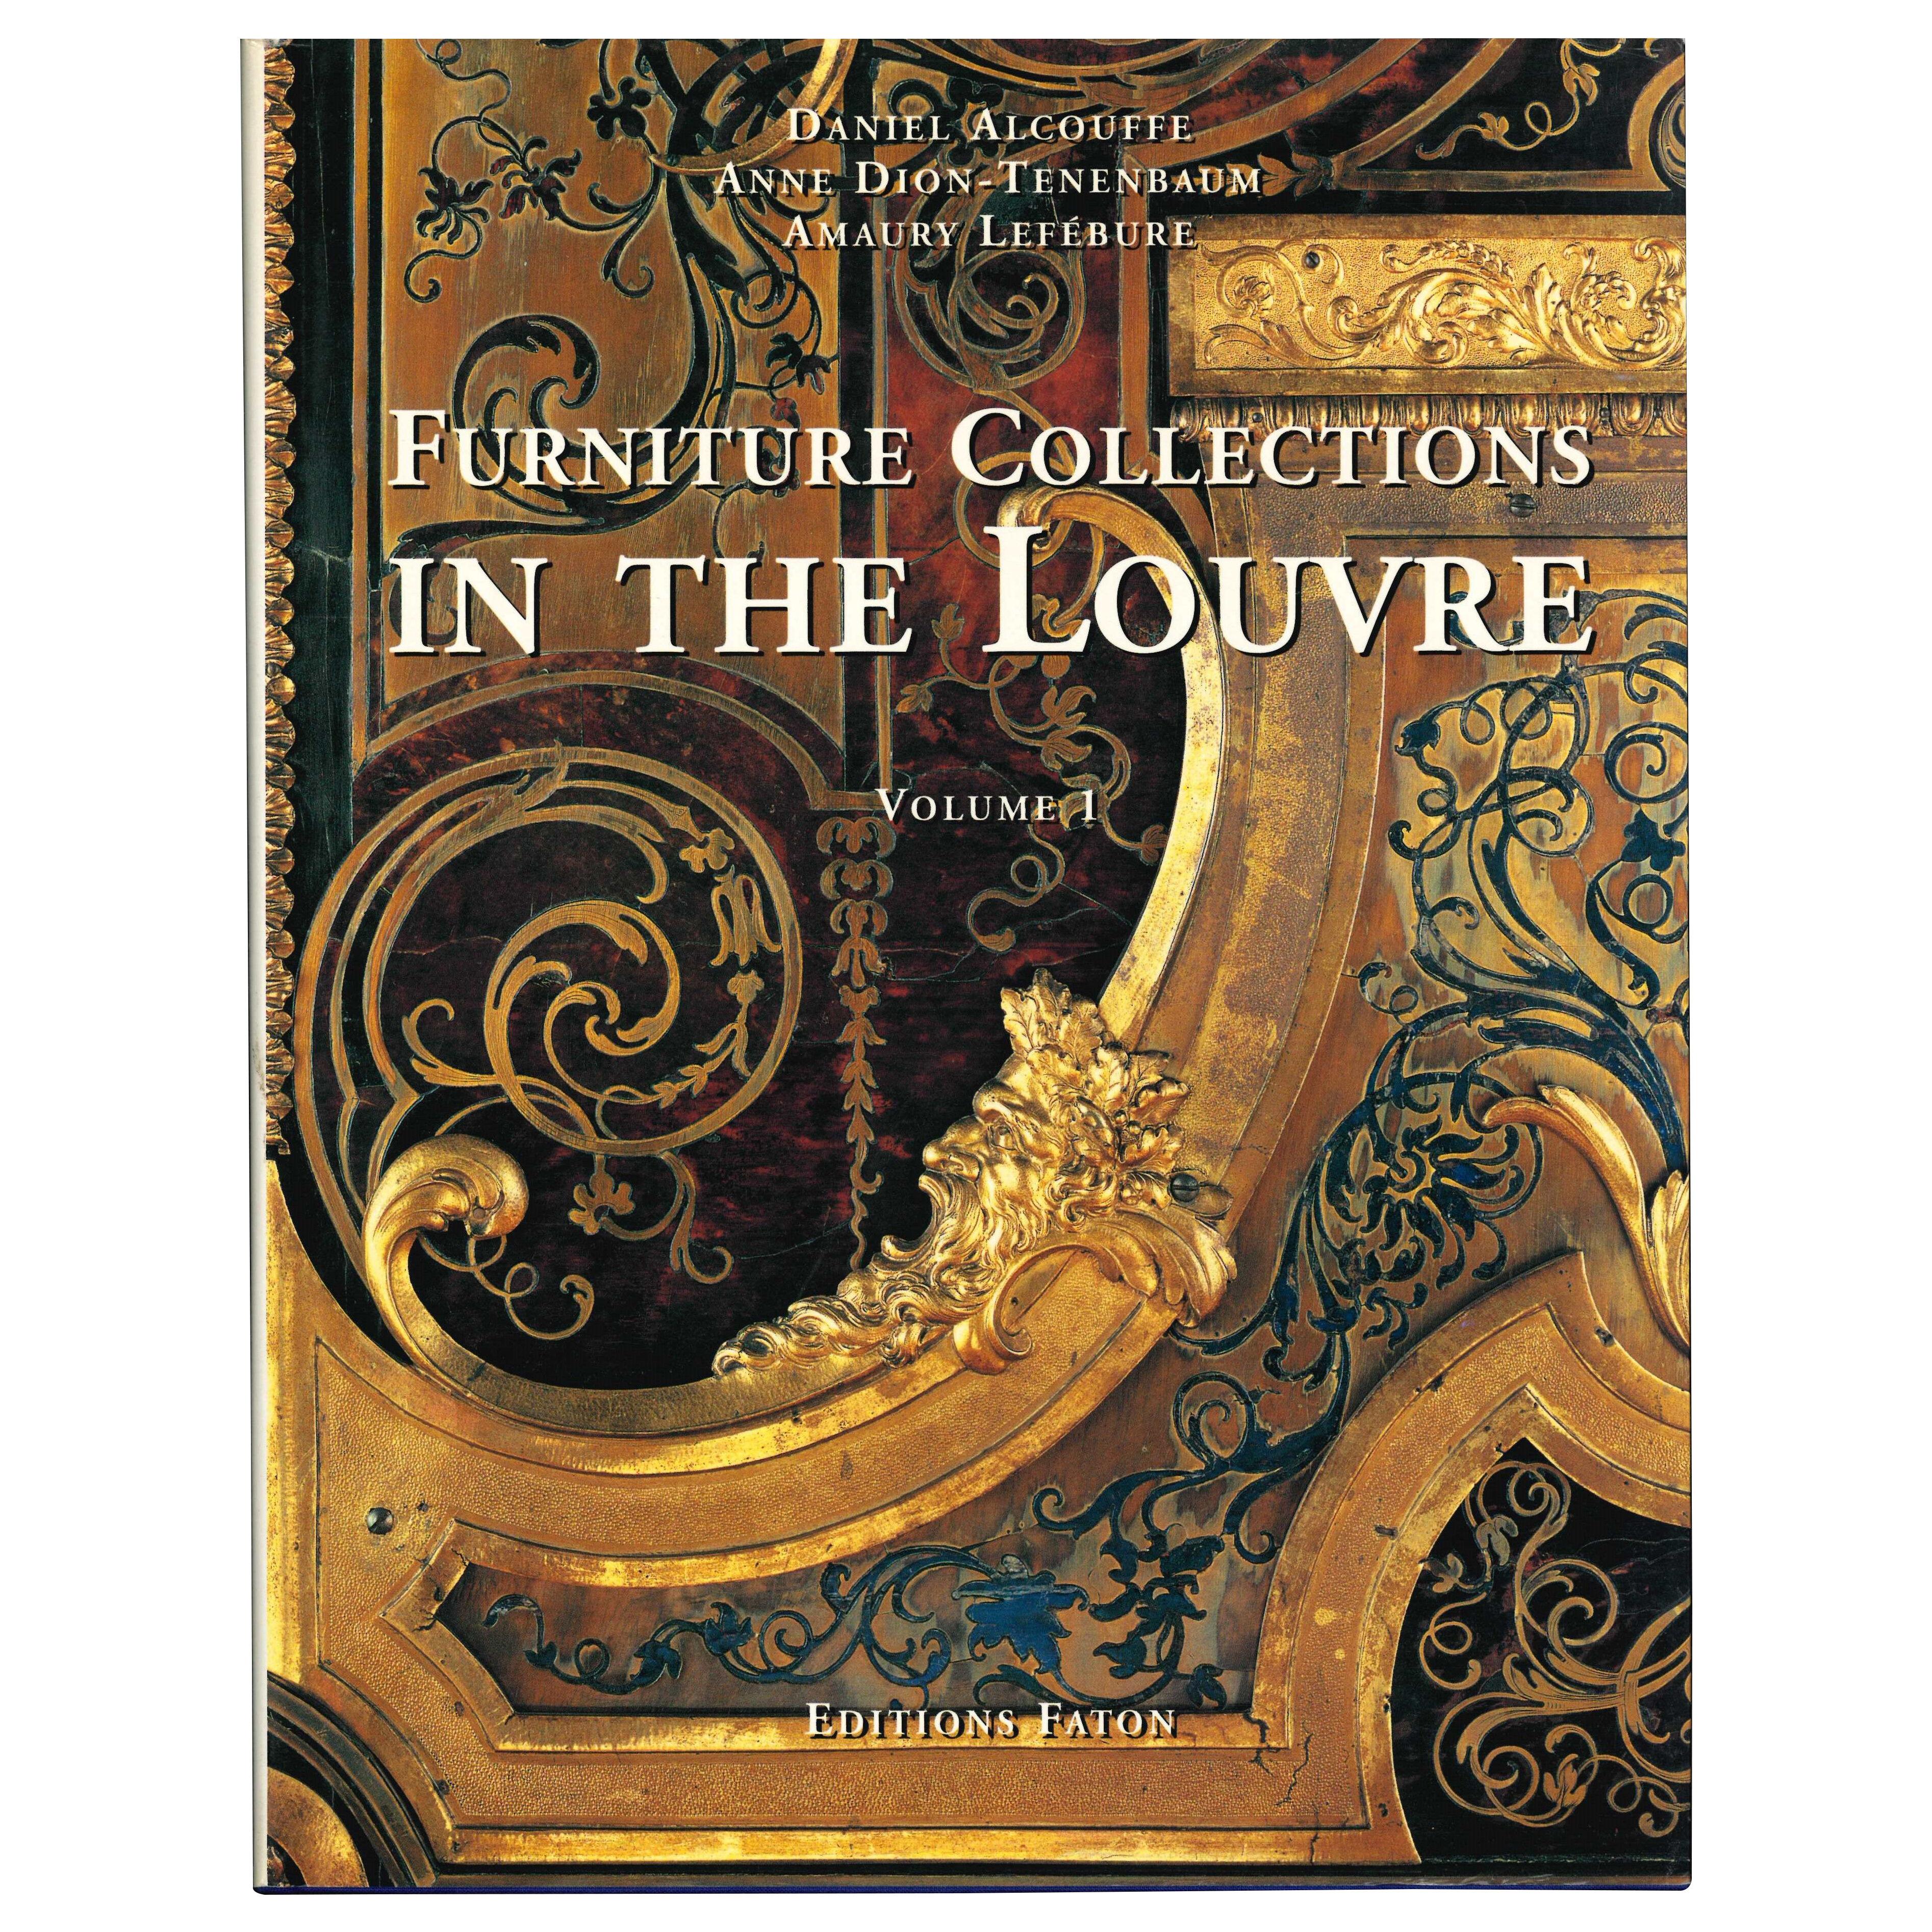 FURNITURE COLLECTIONS IN THE LOUVRE. 2 Books